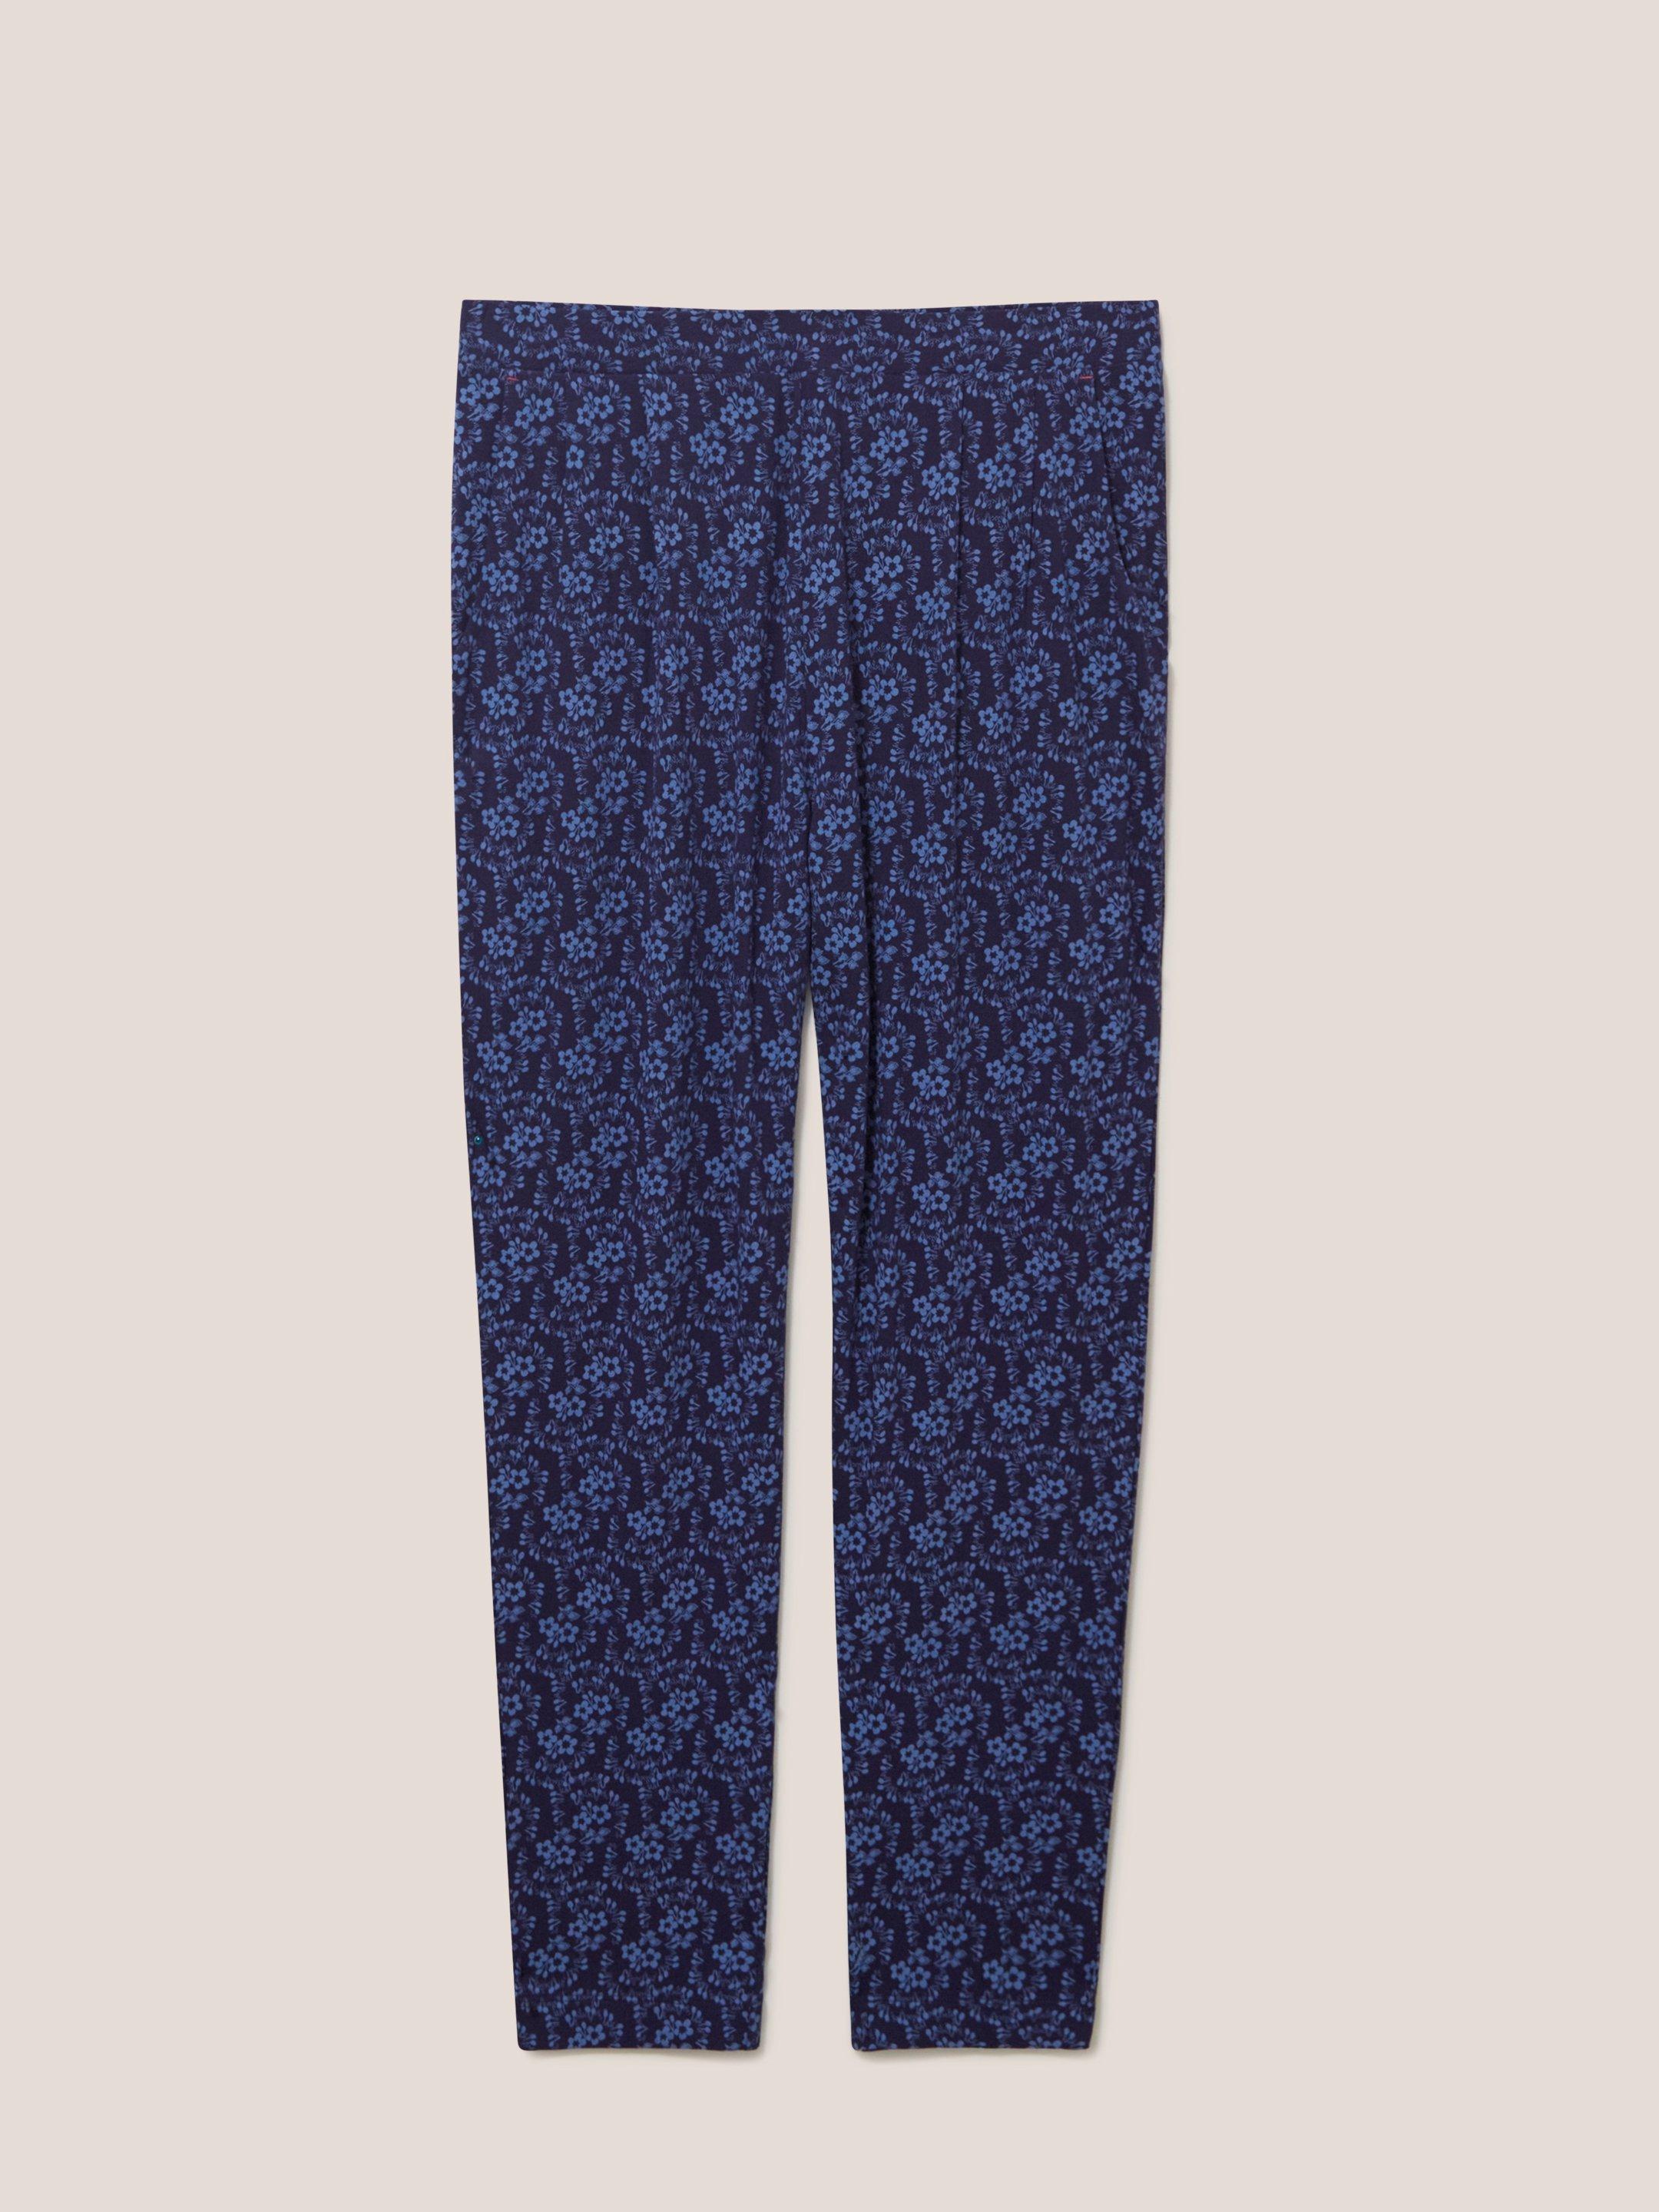 Maison Eco Vero Jersey Trousers in NAVY PR - FLAT FRONT